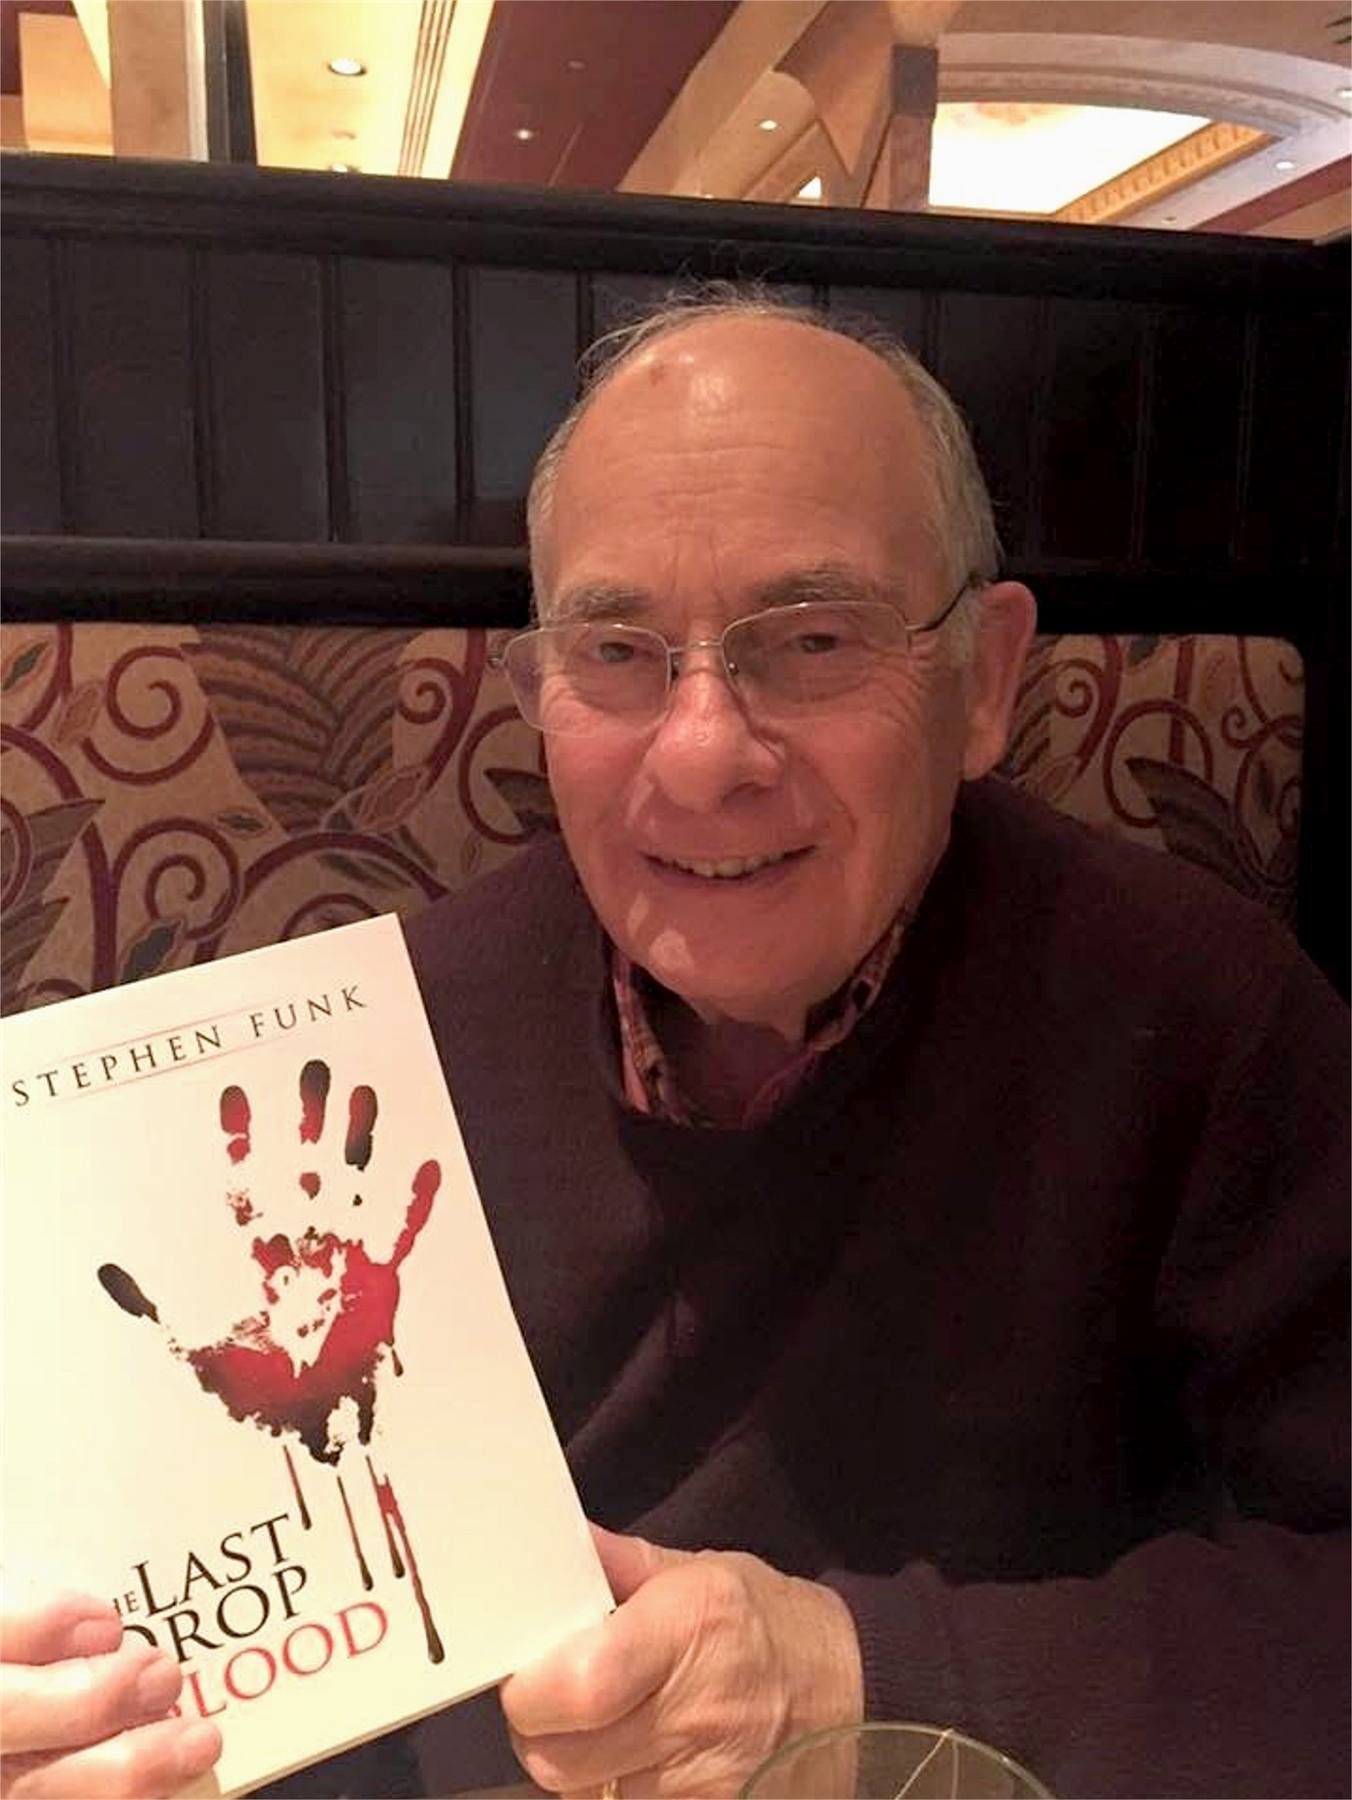 J. Stephen Funk poses with his self-published book